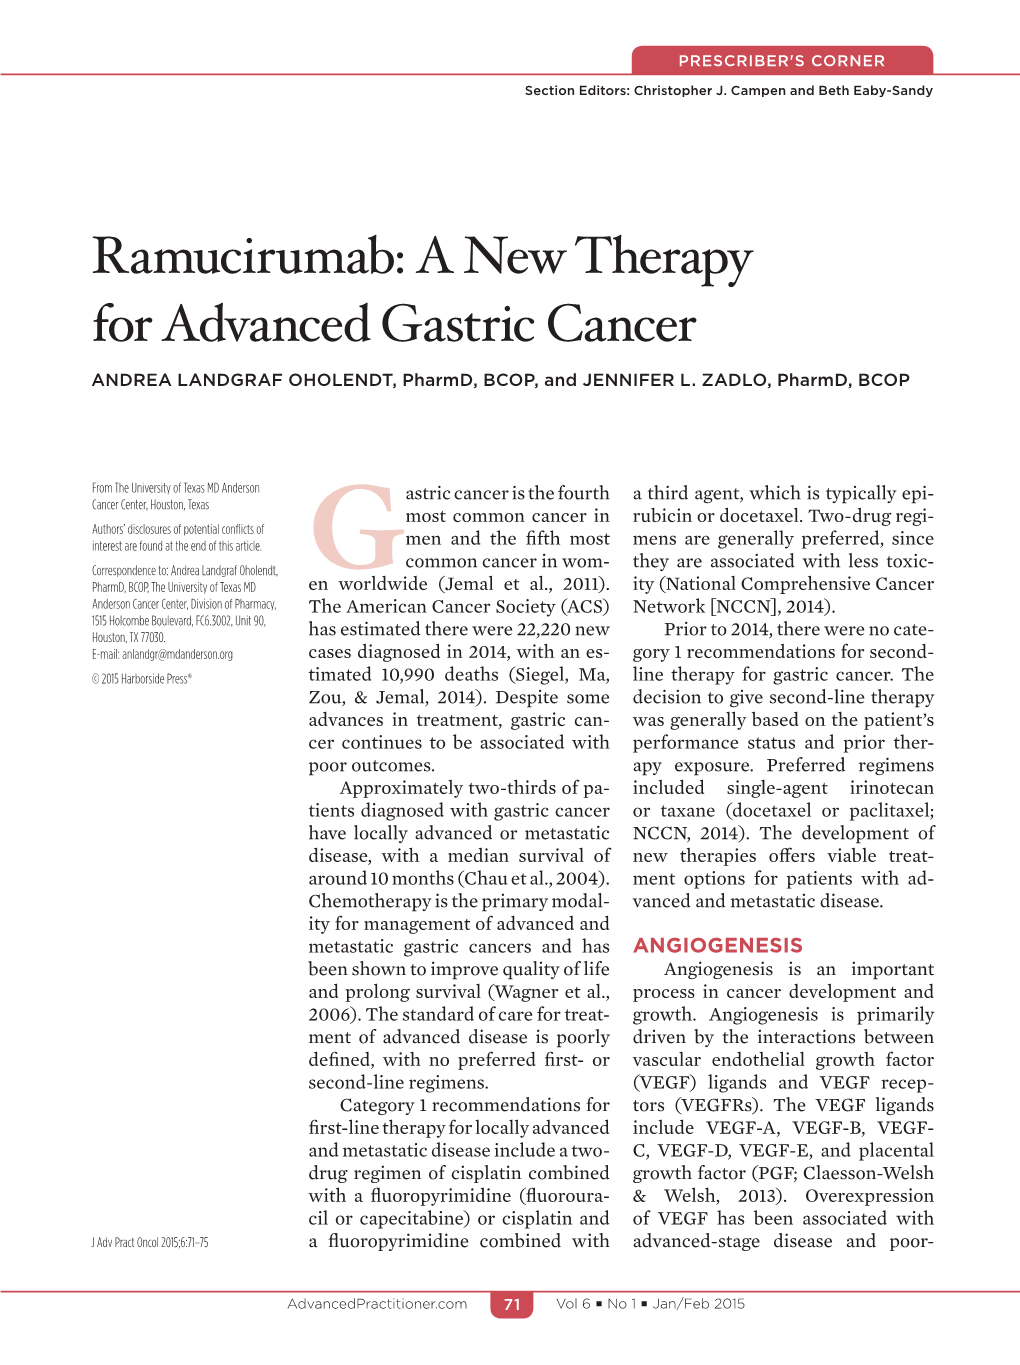 Ramucirumab: a New Therapy for Advanced Gastric Cancer